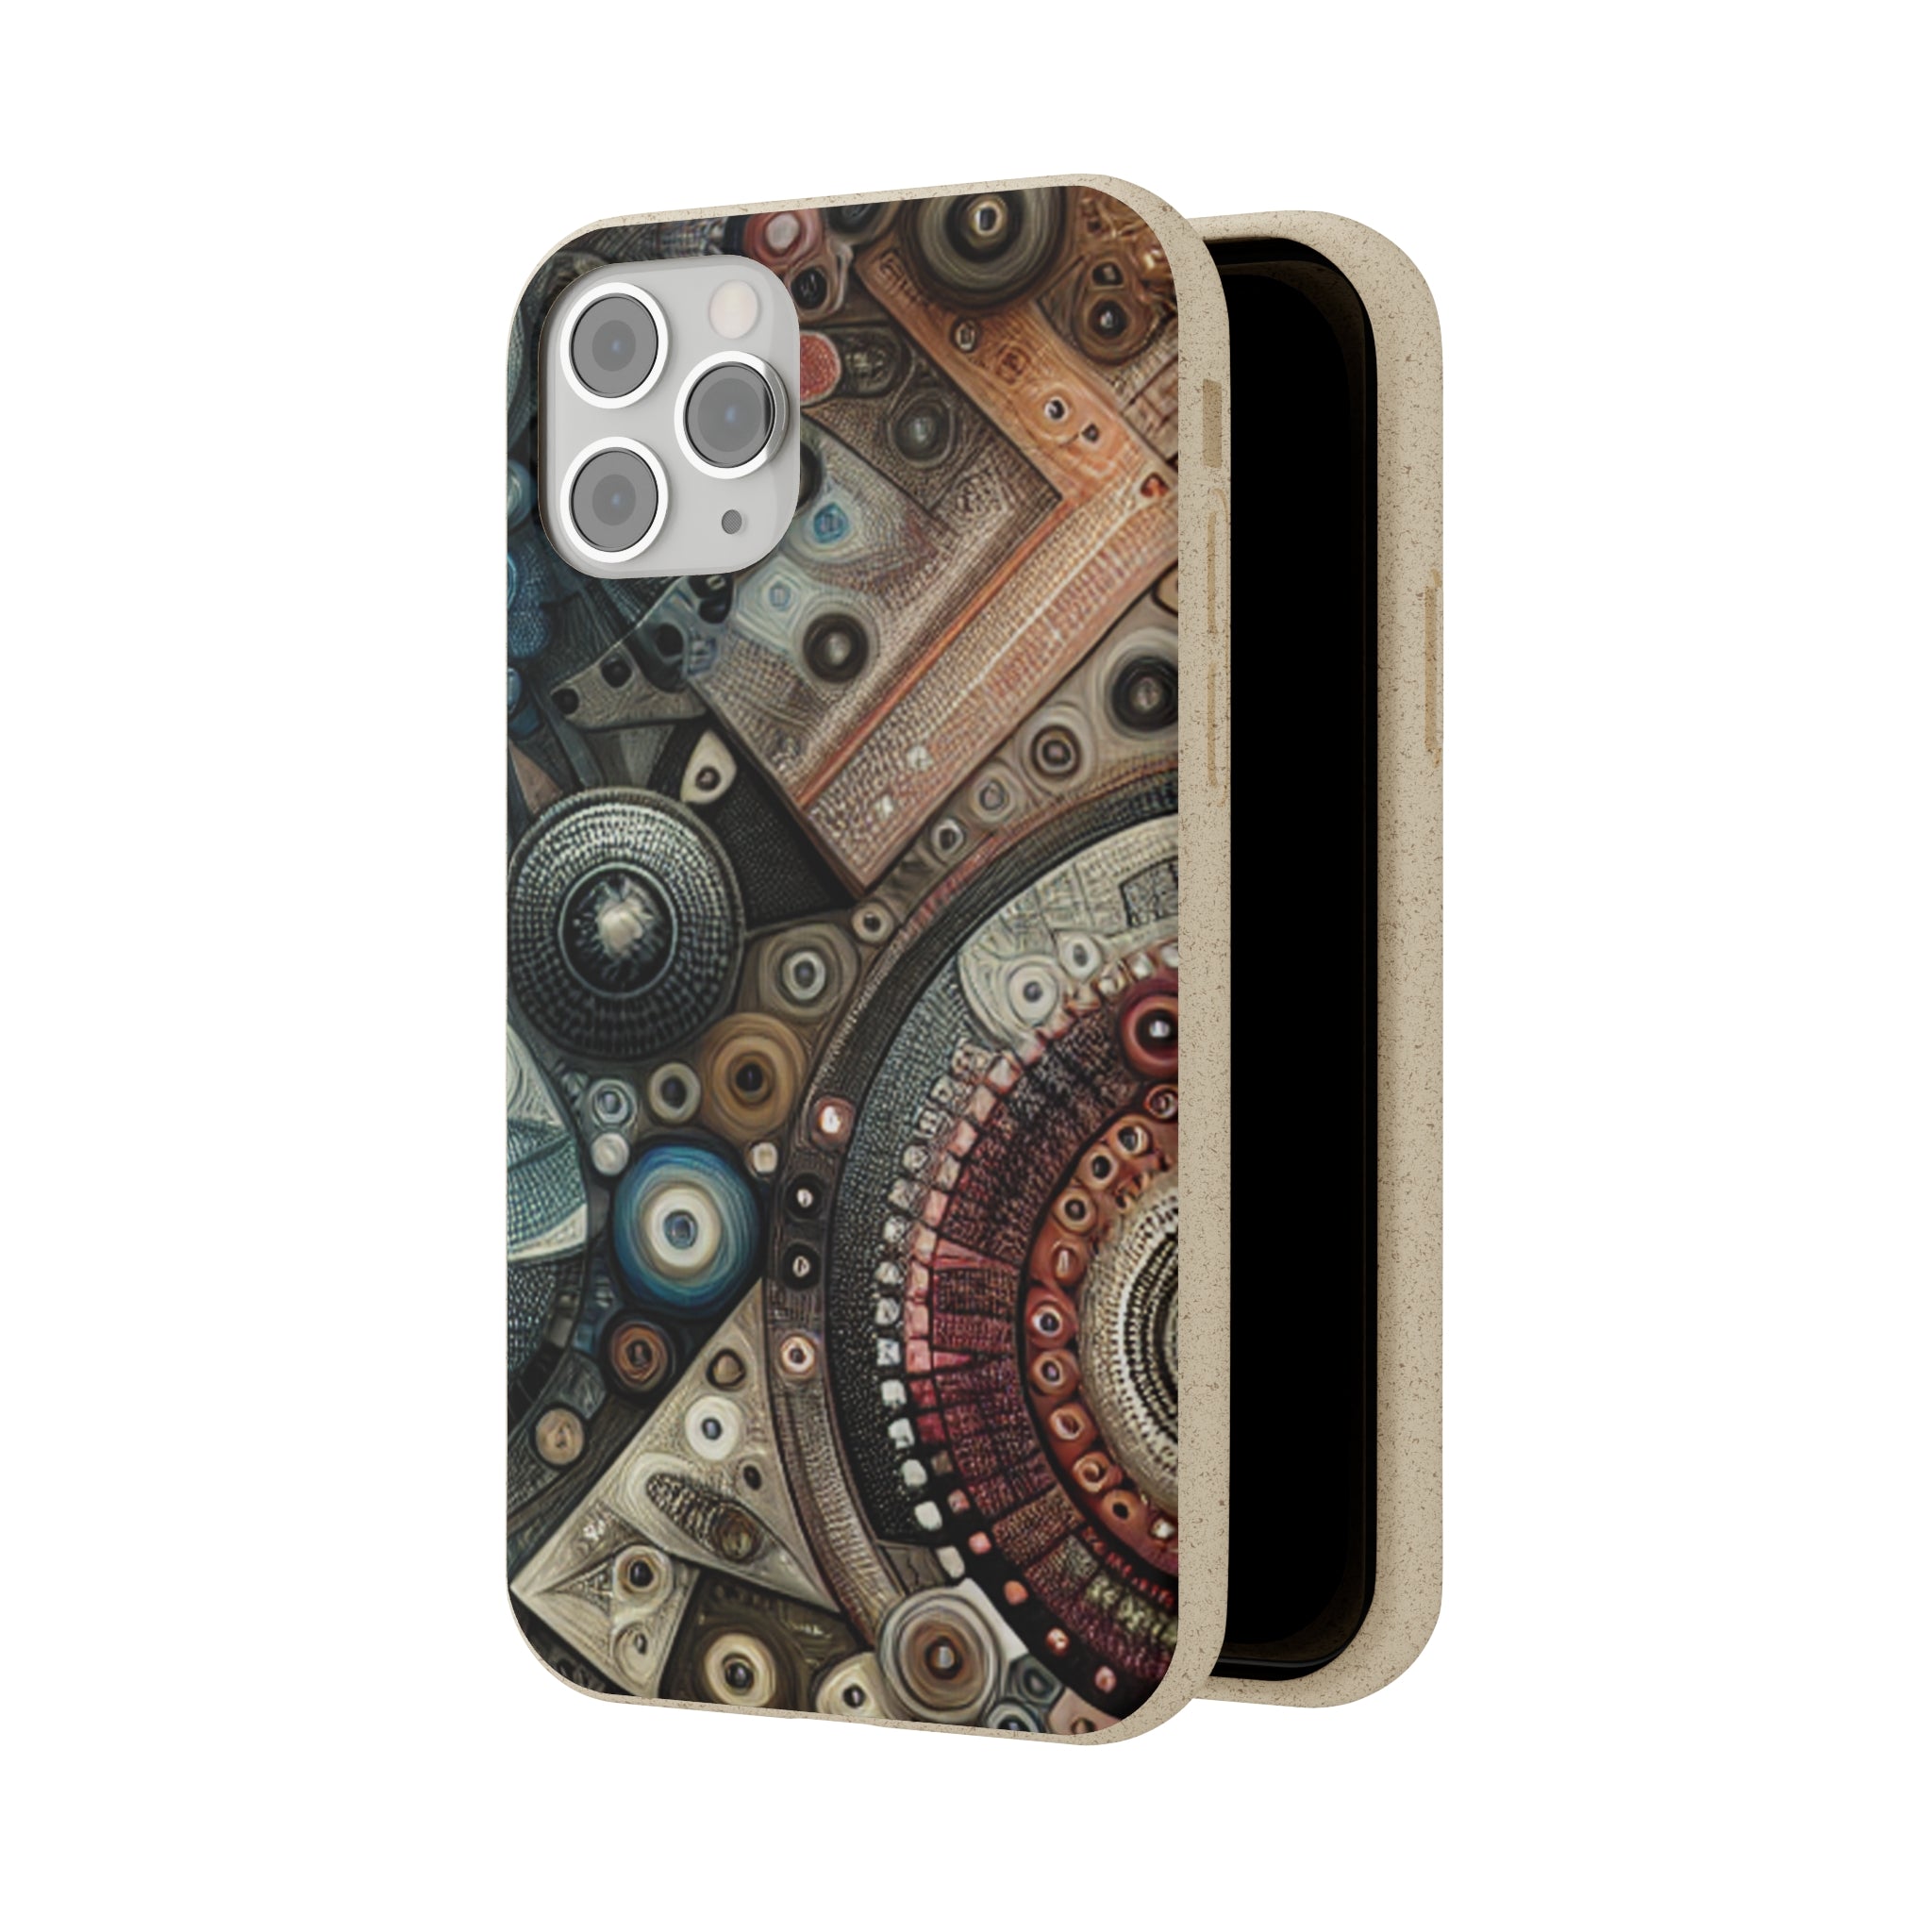 Jenna Crafts - Biodegradable iPhone Cases